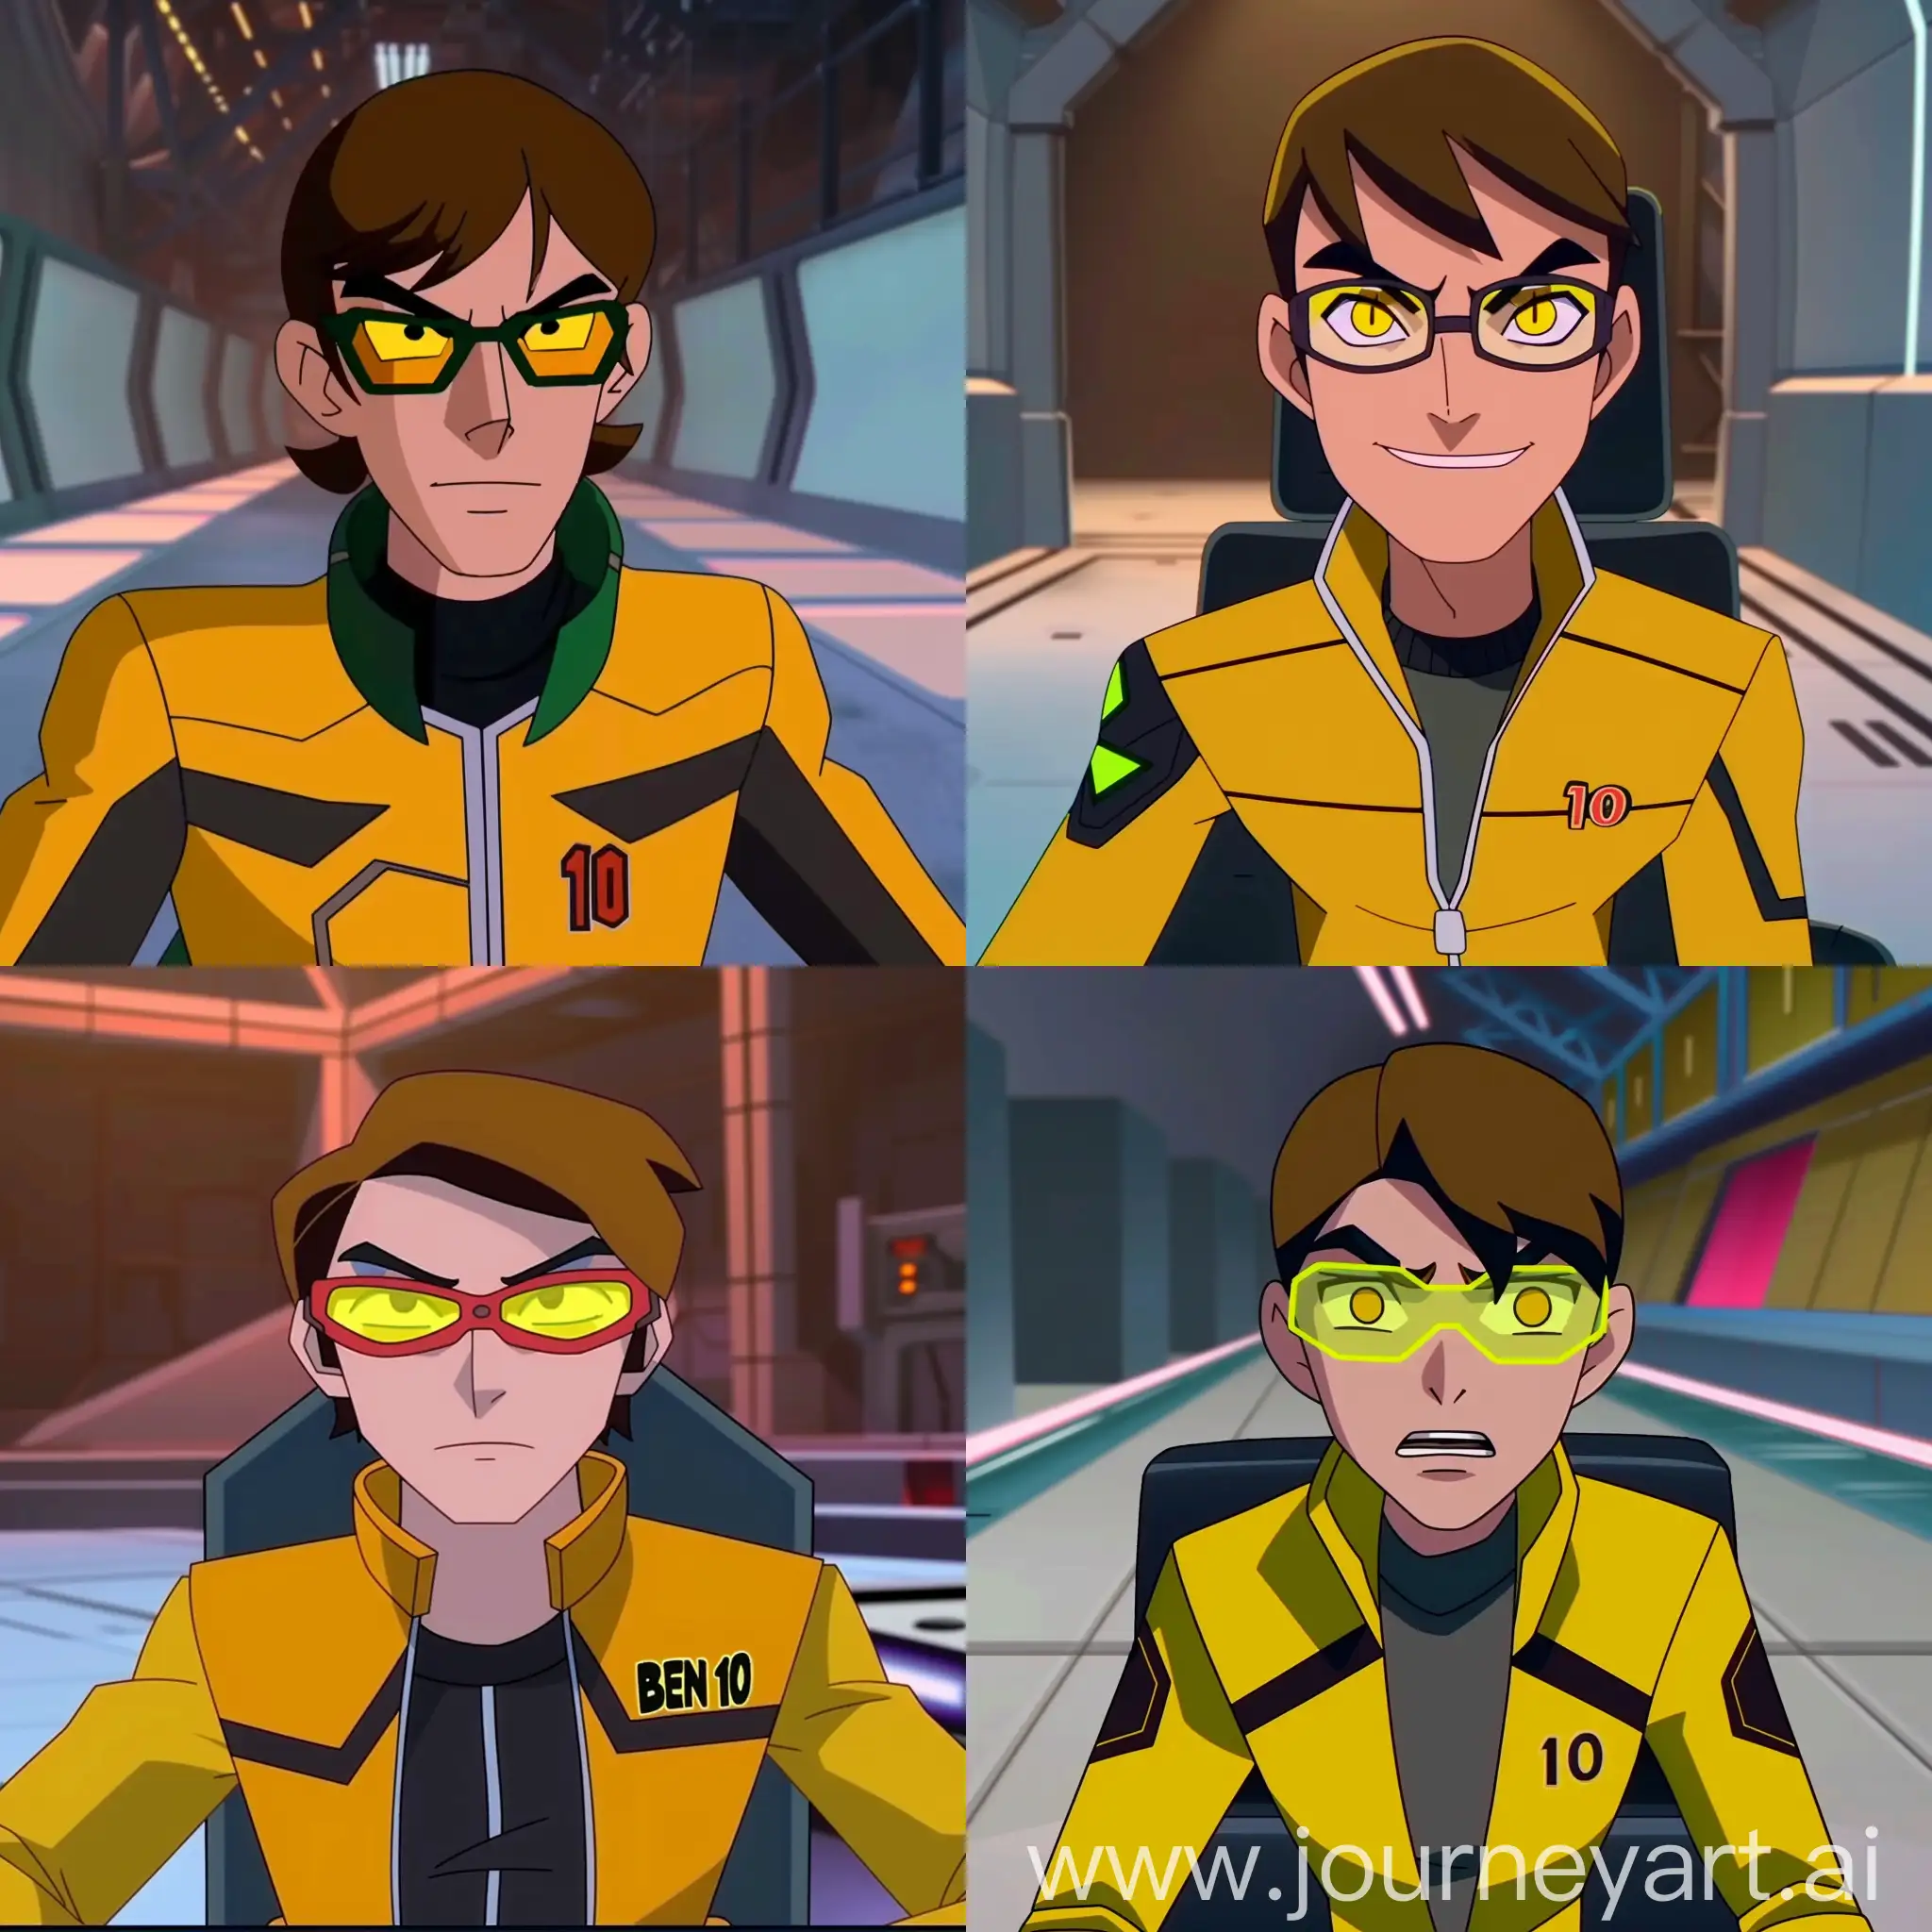 Animated-Character-in-Man-of-Action-Style-Handsome-Ben-10-Smirking-in-Party-Glasses